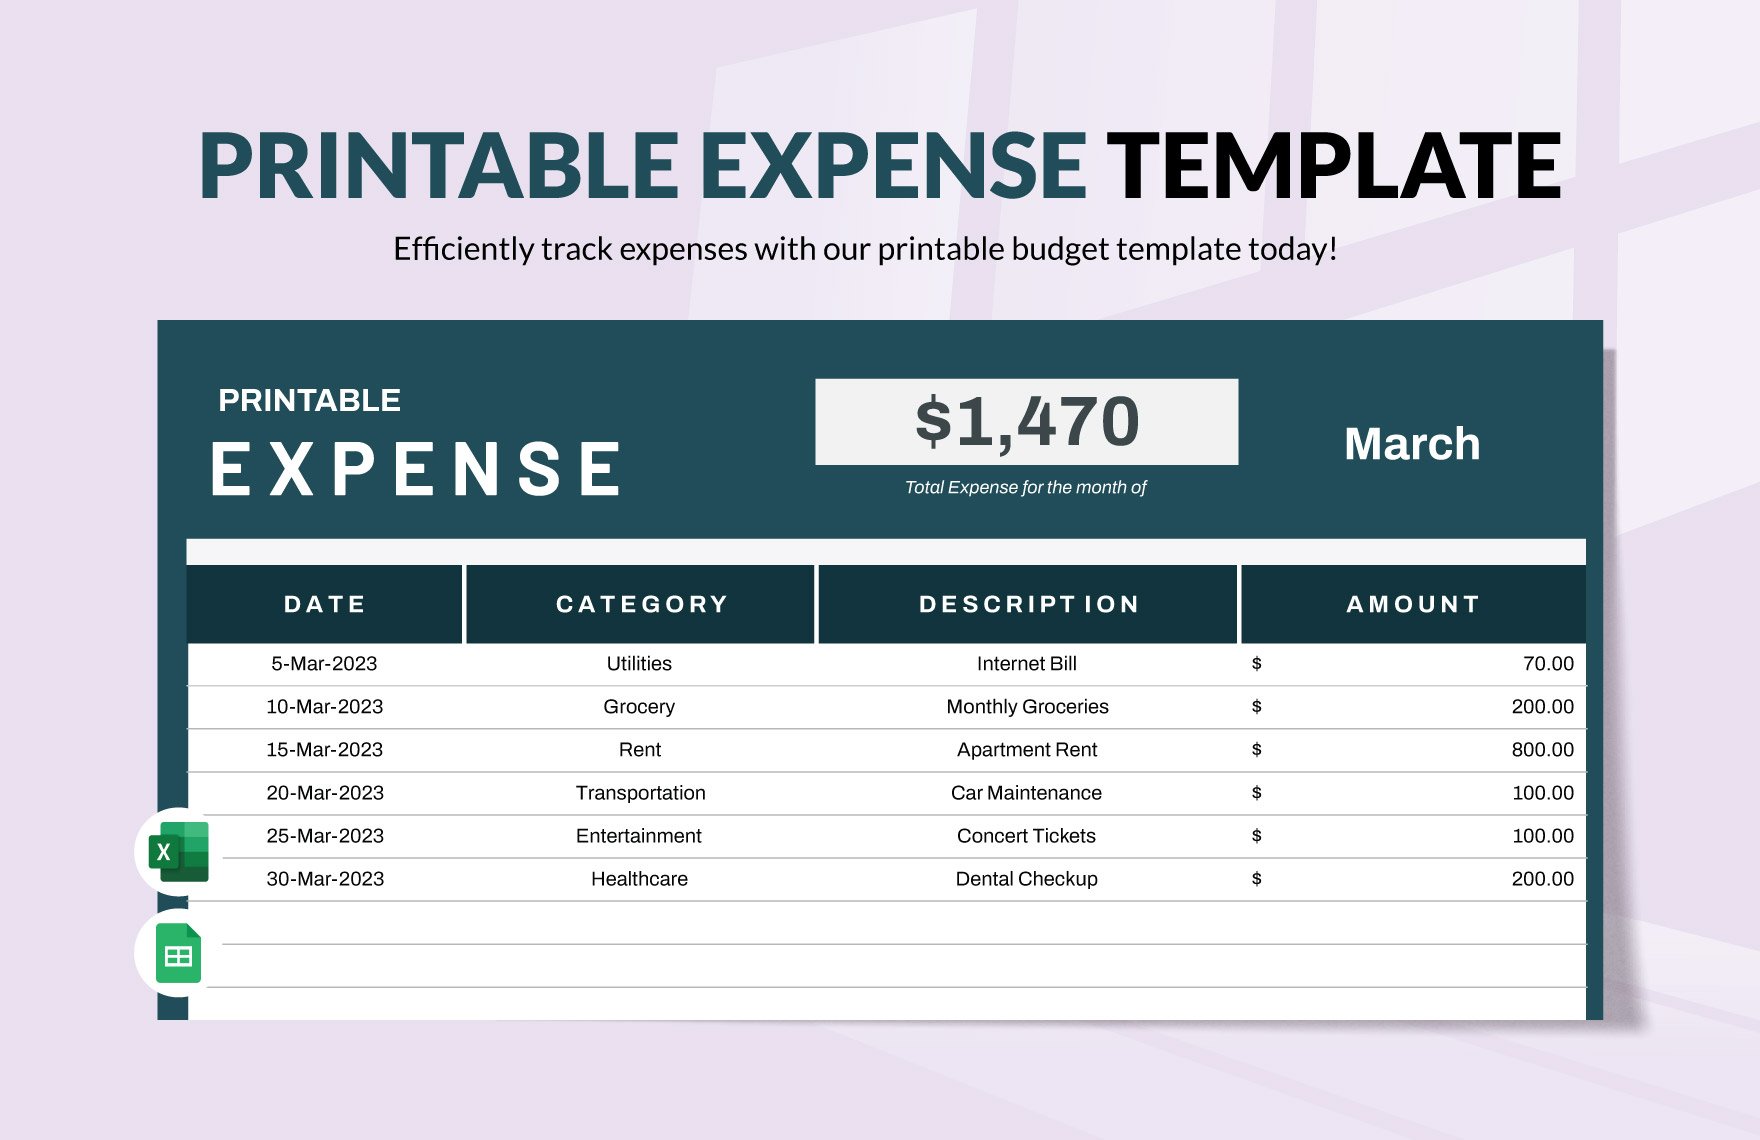 Printable Expense Template in Excel, Google Sheets